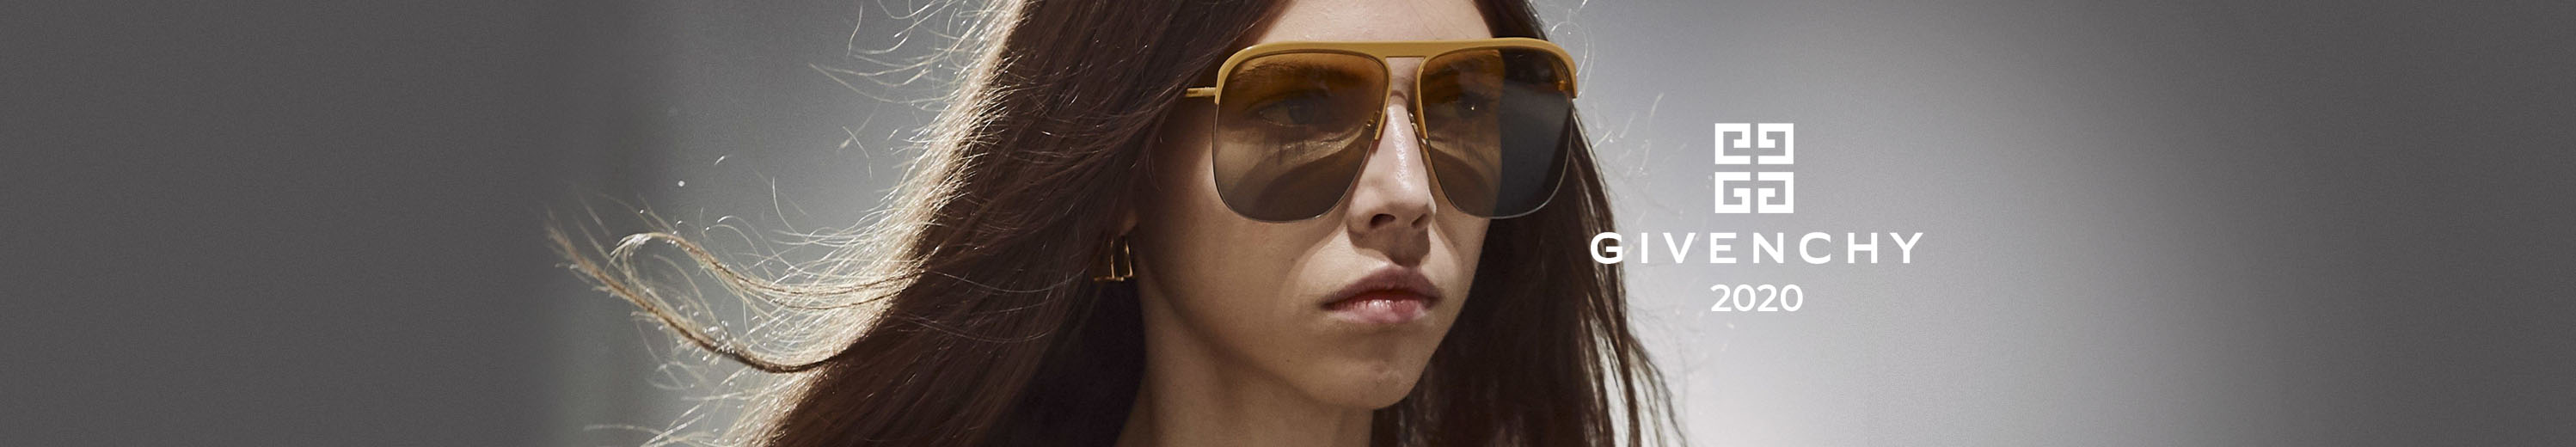 Givenchy 2020 Eyewear Collection